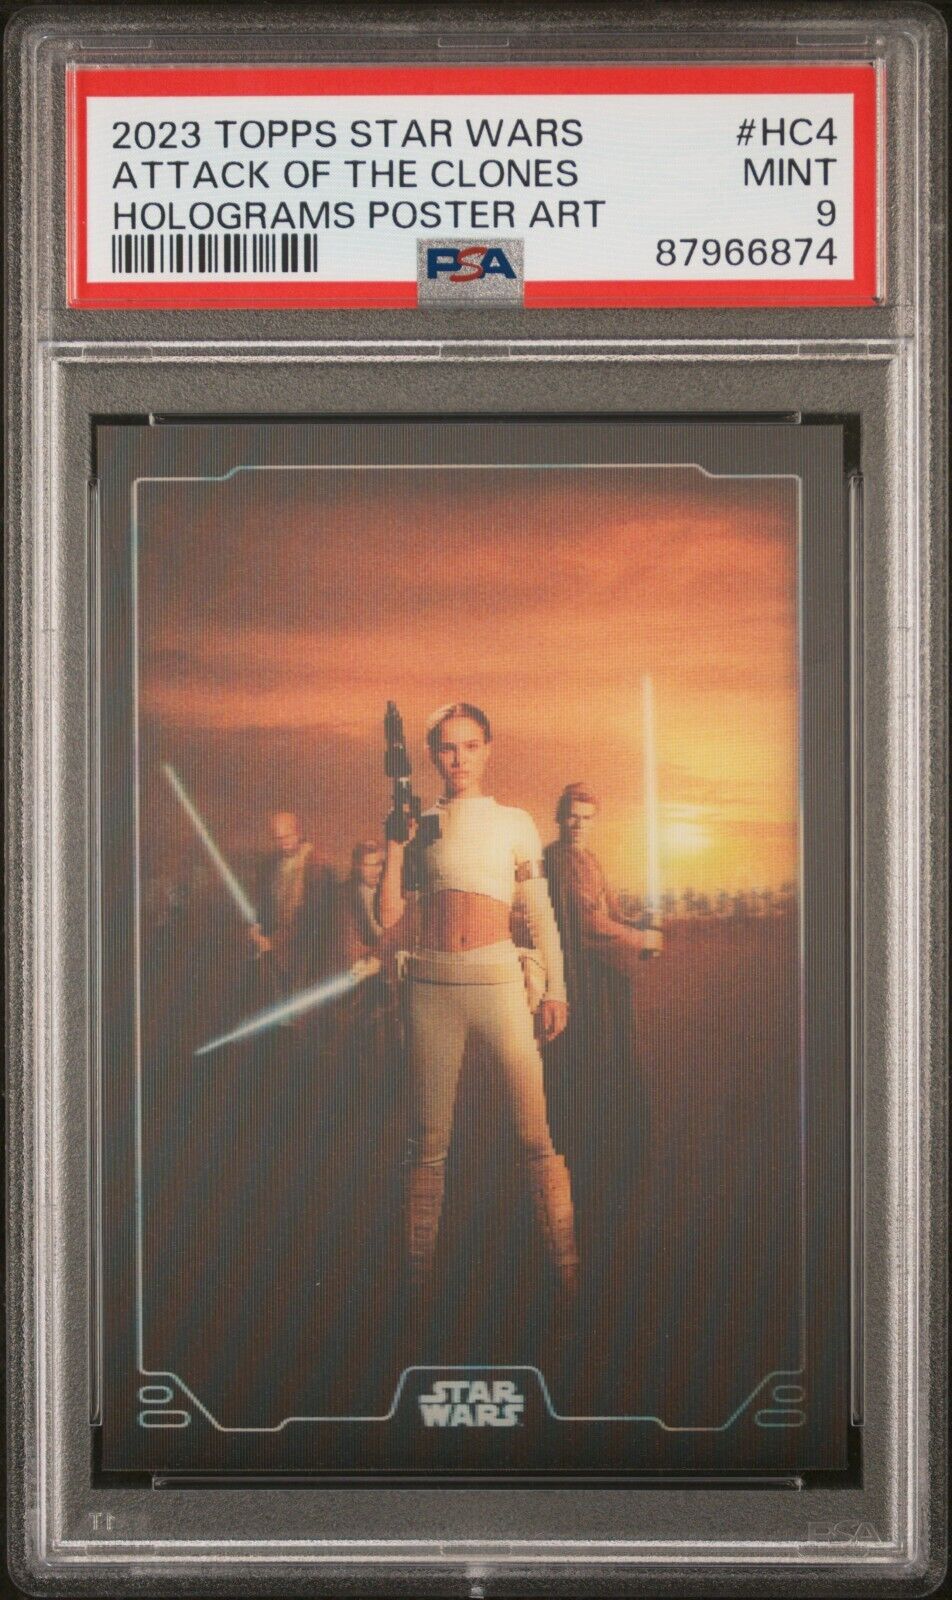 2023 TOPPS STAR WARS HOLOGRAMS POSTER ART HC4 ATTACK OF THE CLONES PADME PSA 9